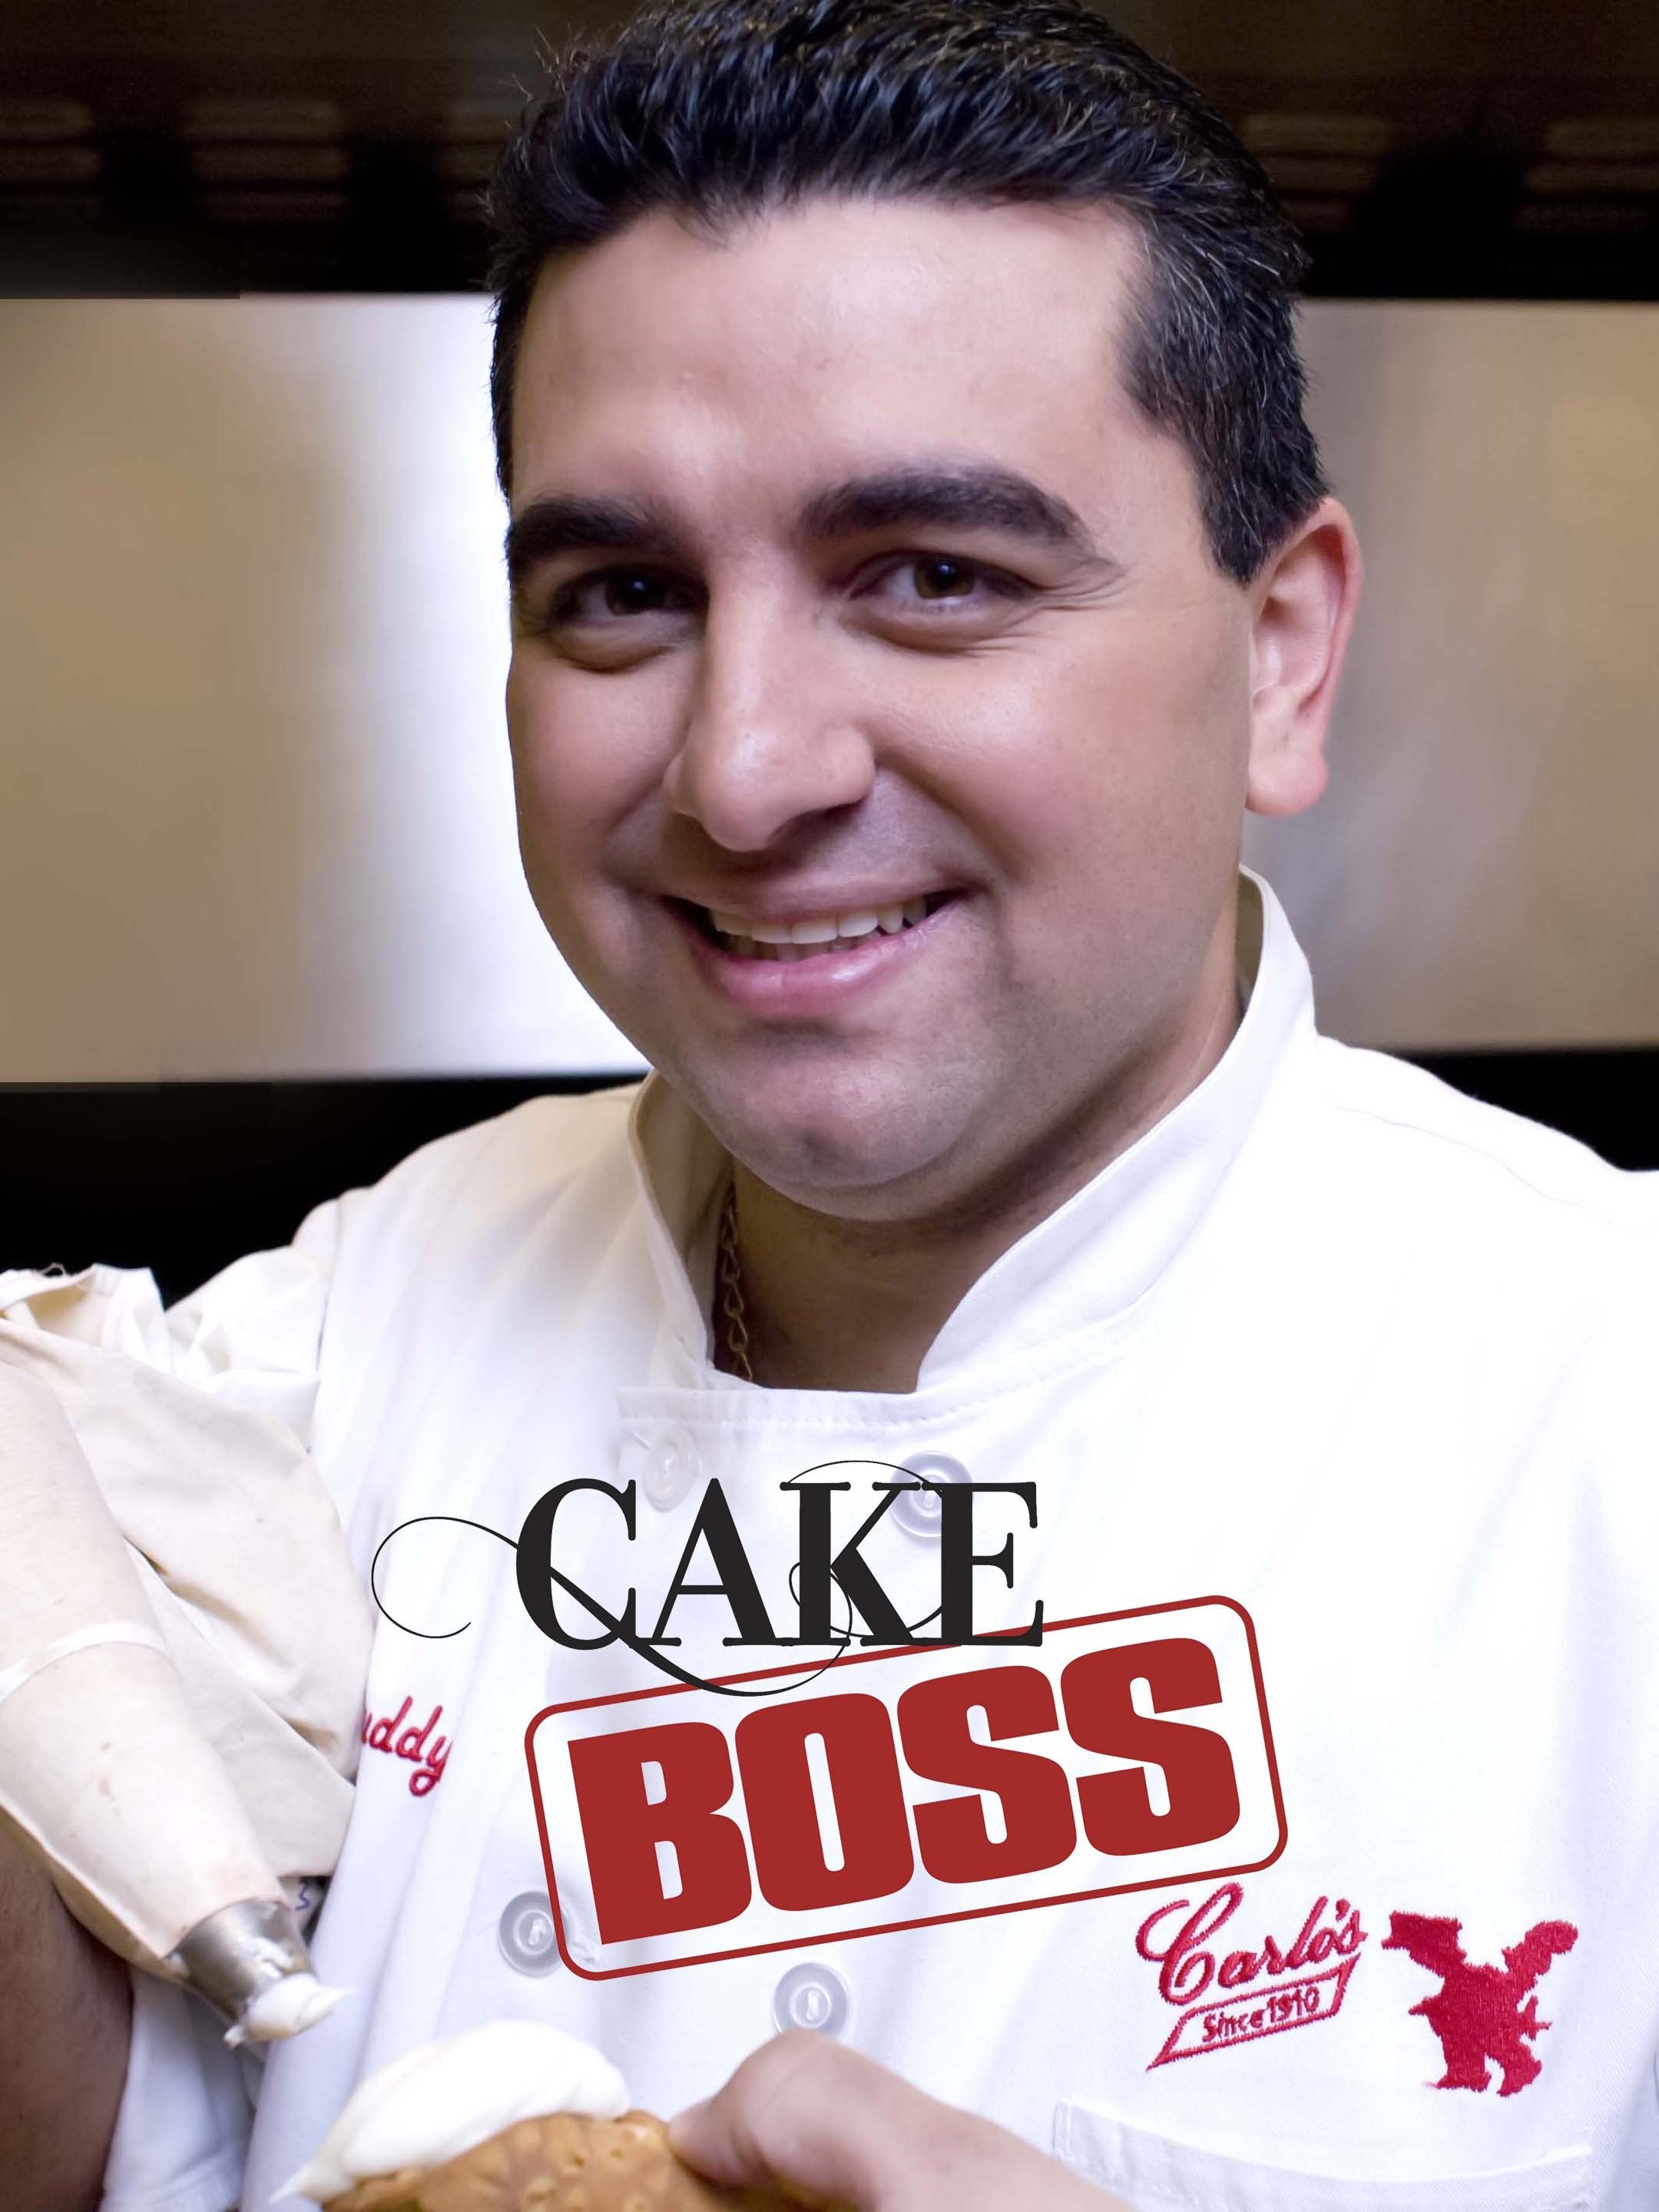 An Easter Treat From the Cake Boss - The New York Times